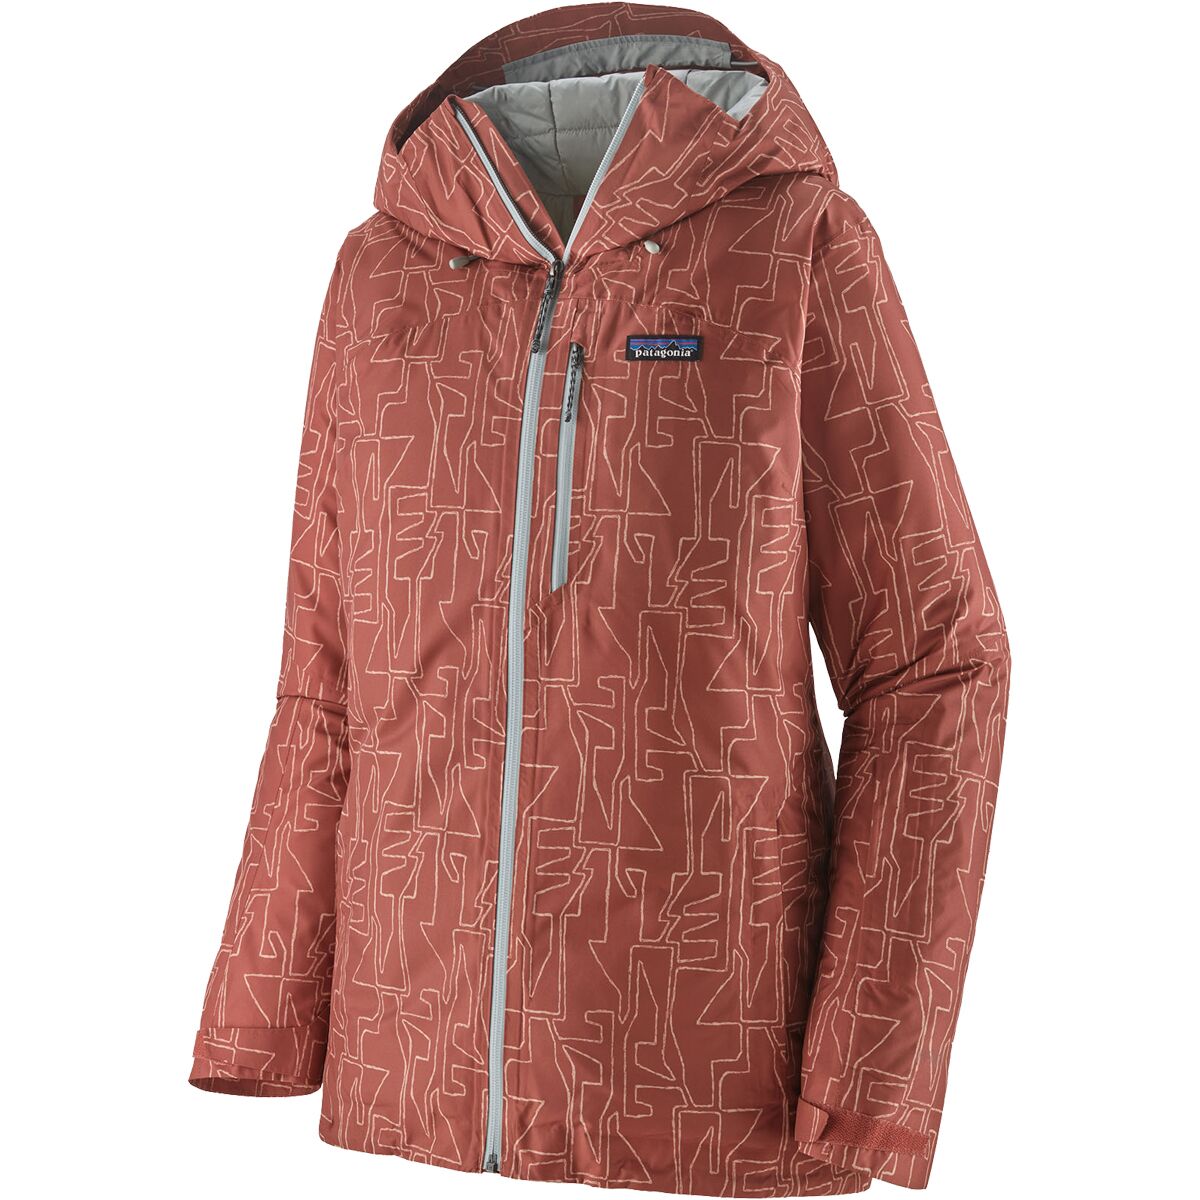 Patagonia Insulated Powder Town Jacket - Women's Passage/Burl Red